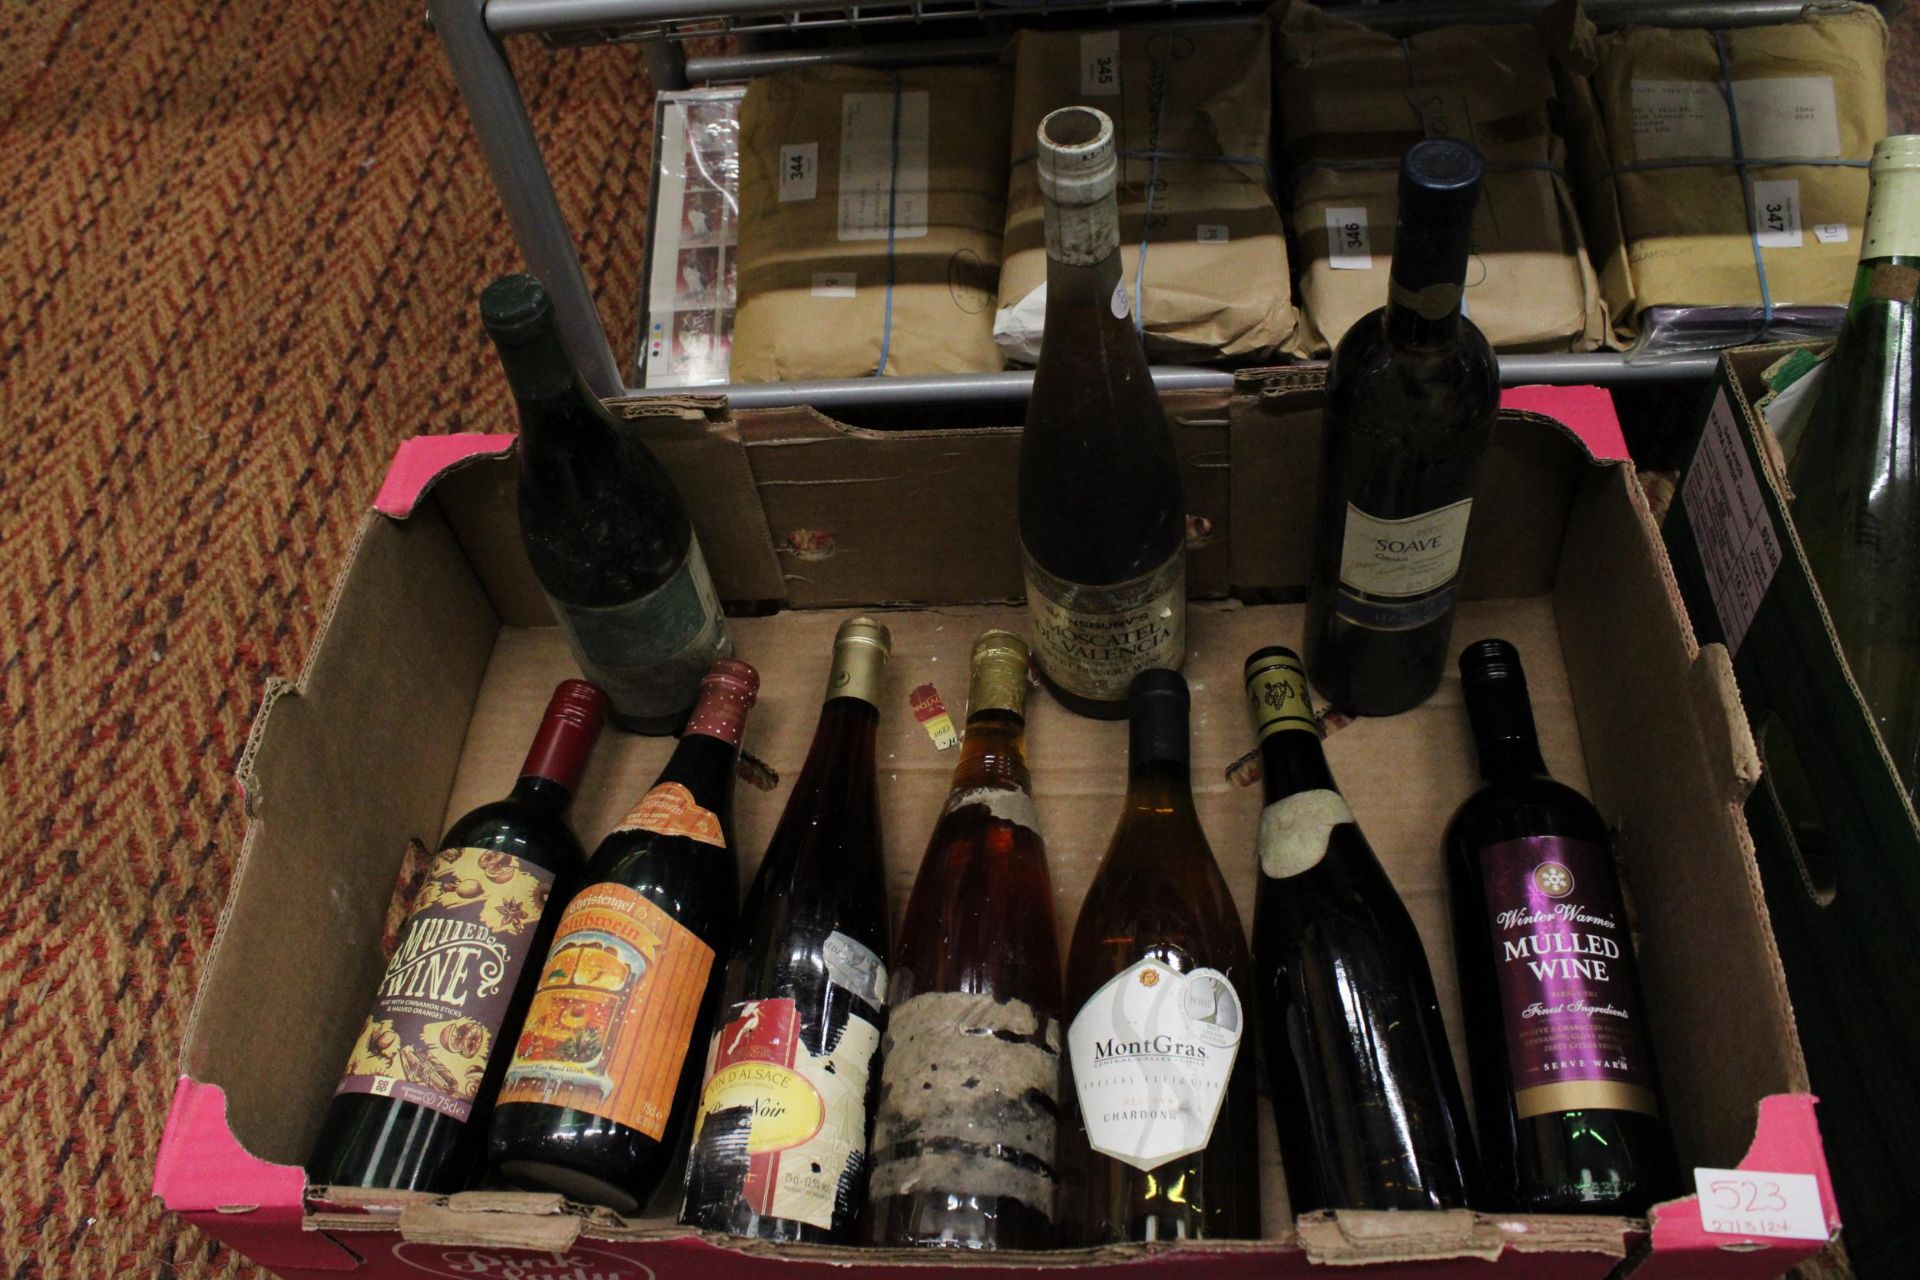 NINETEEN ASSORTED BOTTLES OF WINE TO INCLUDE SANGRIA, CIDRE BRUT, SOAVE CLASSICO 2007, MULLED - Image 2 of 3